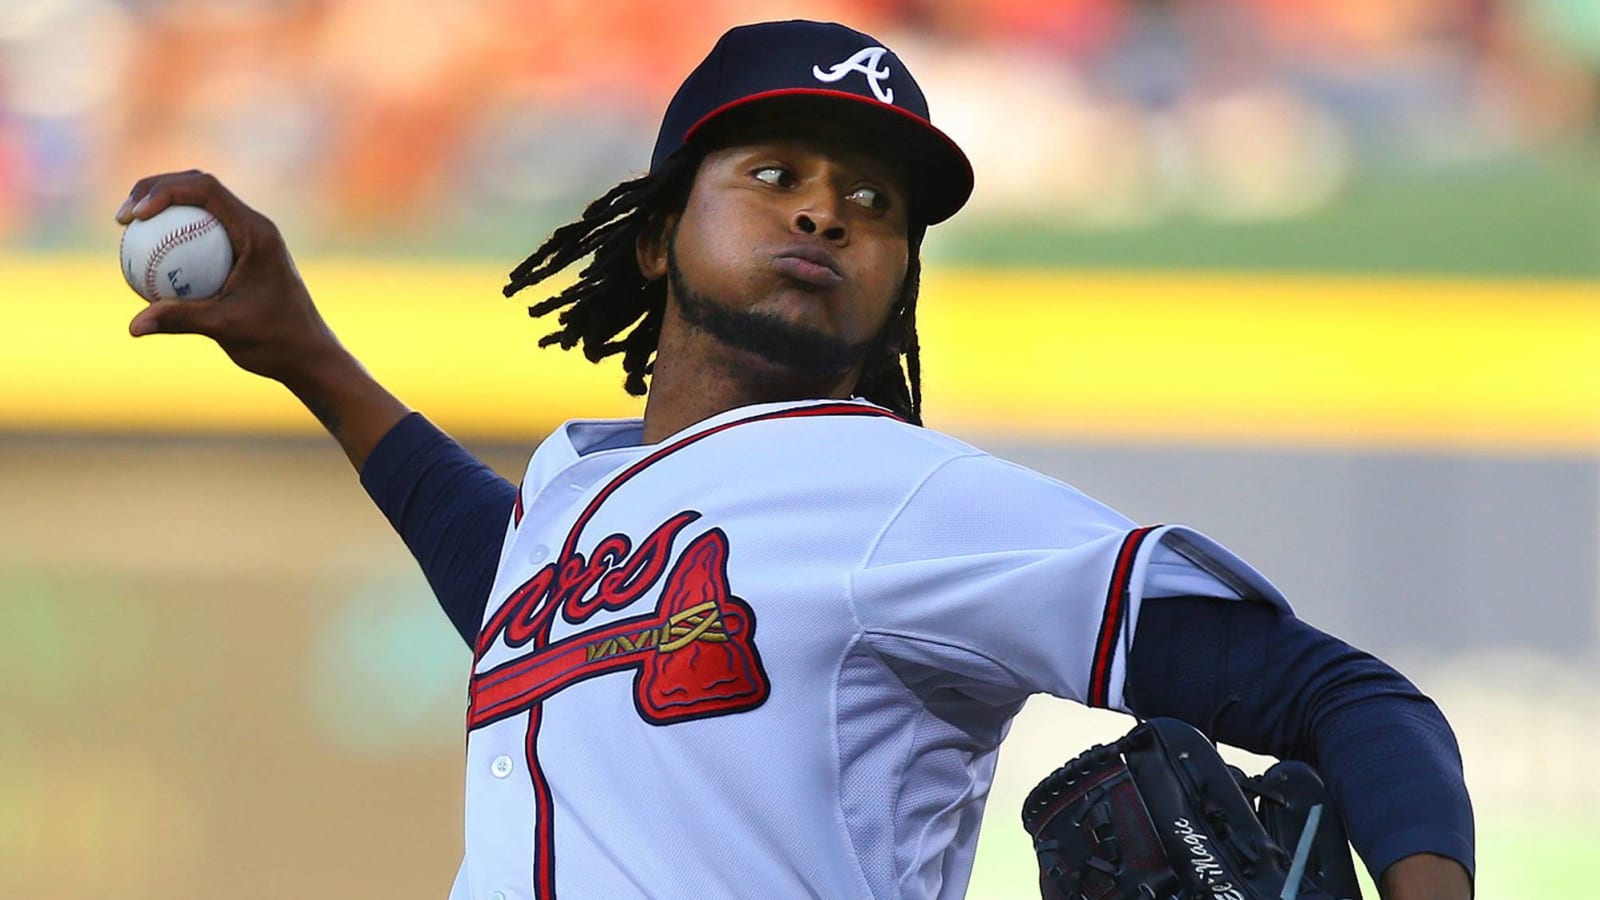 The Ervin Santana signing is still paying dividends for the Braves